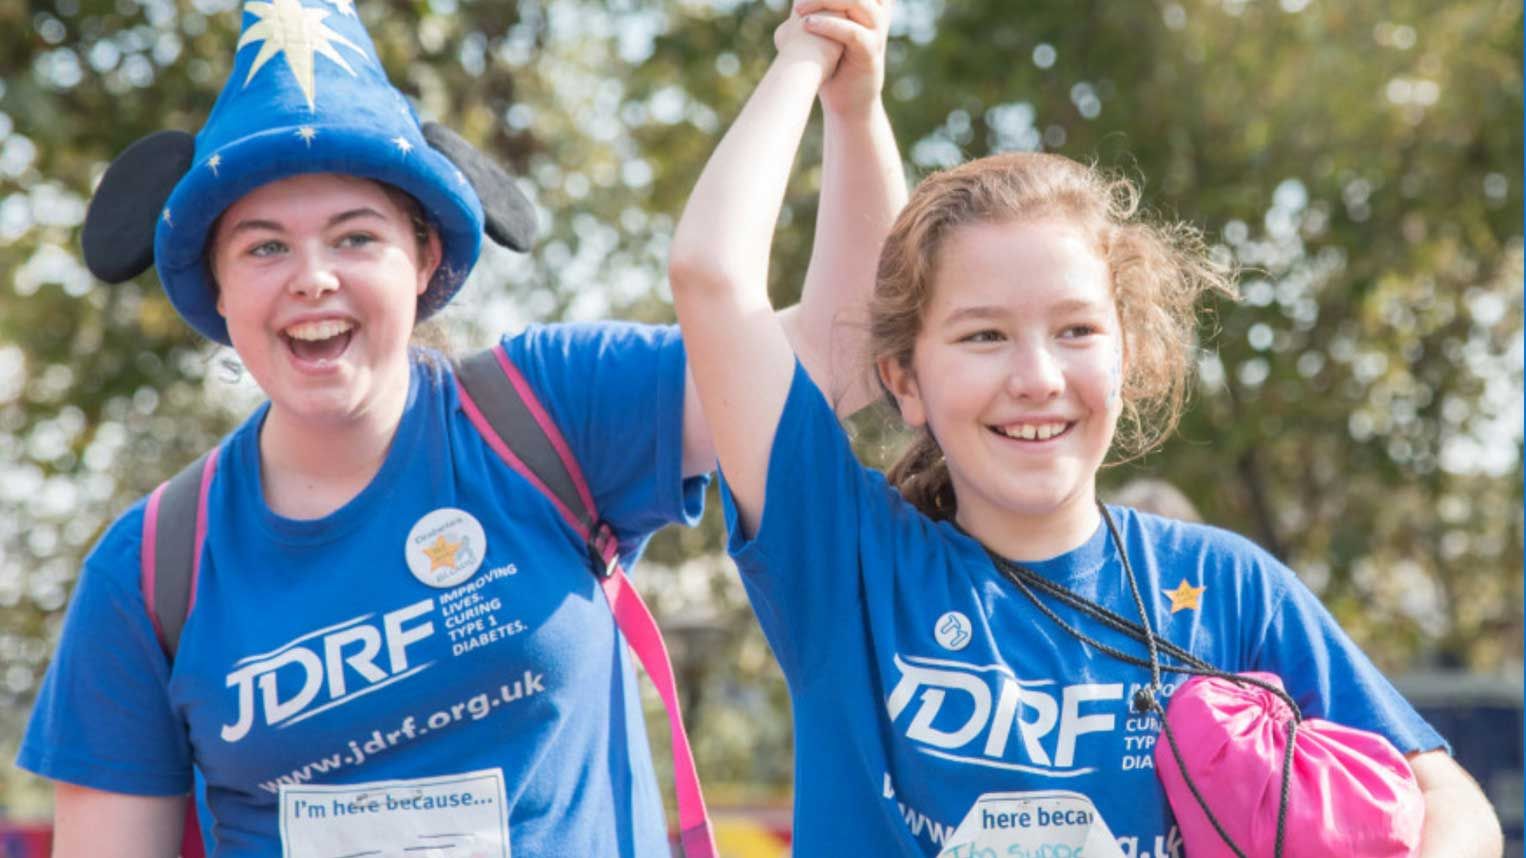 JDRF happiness award nominees